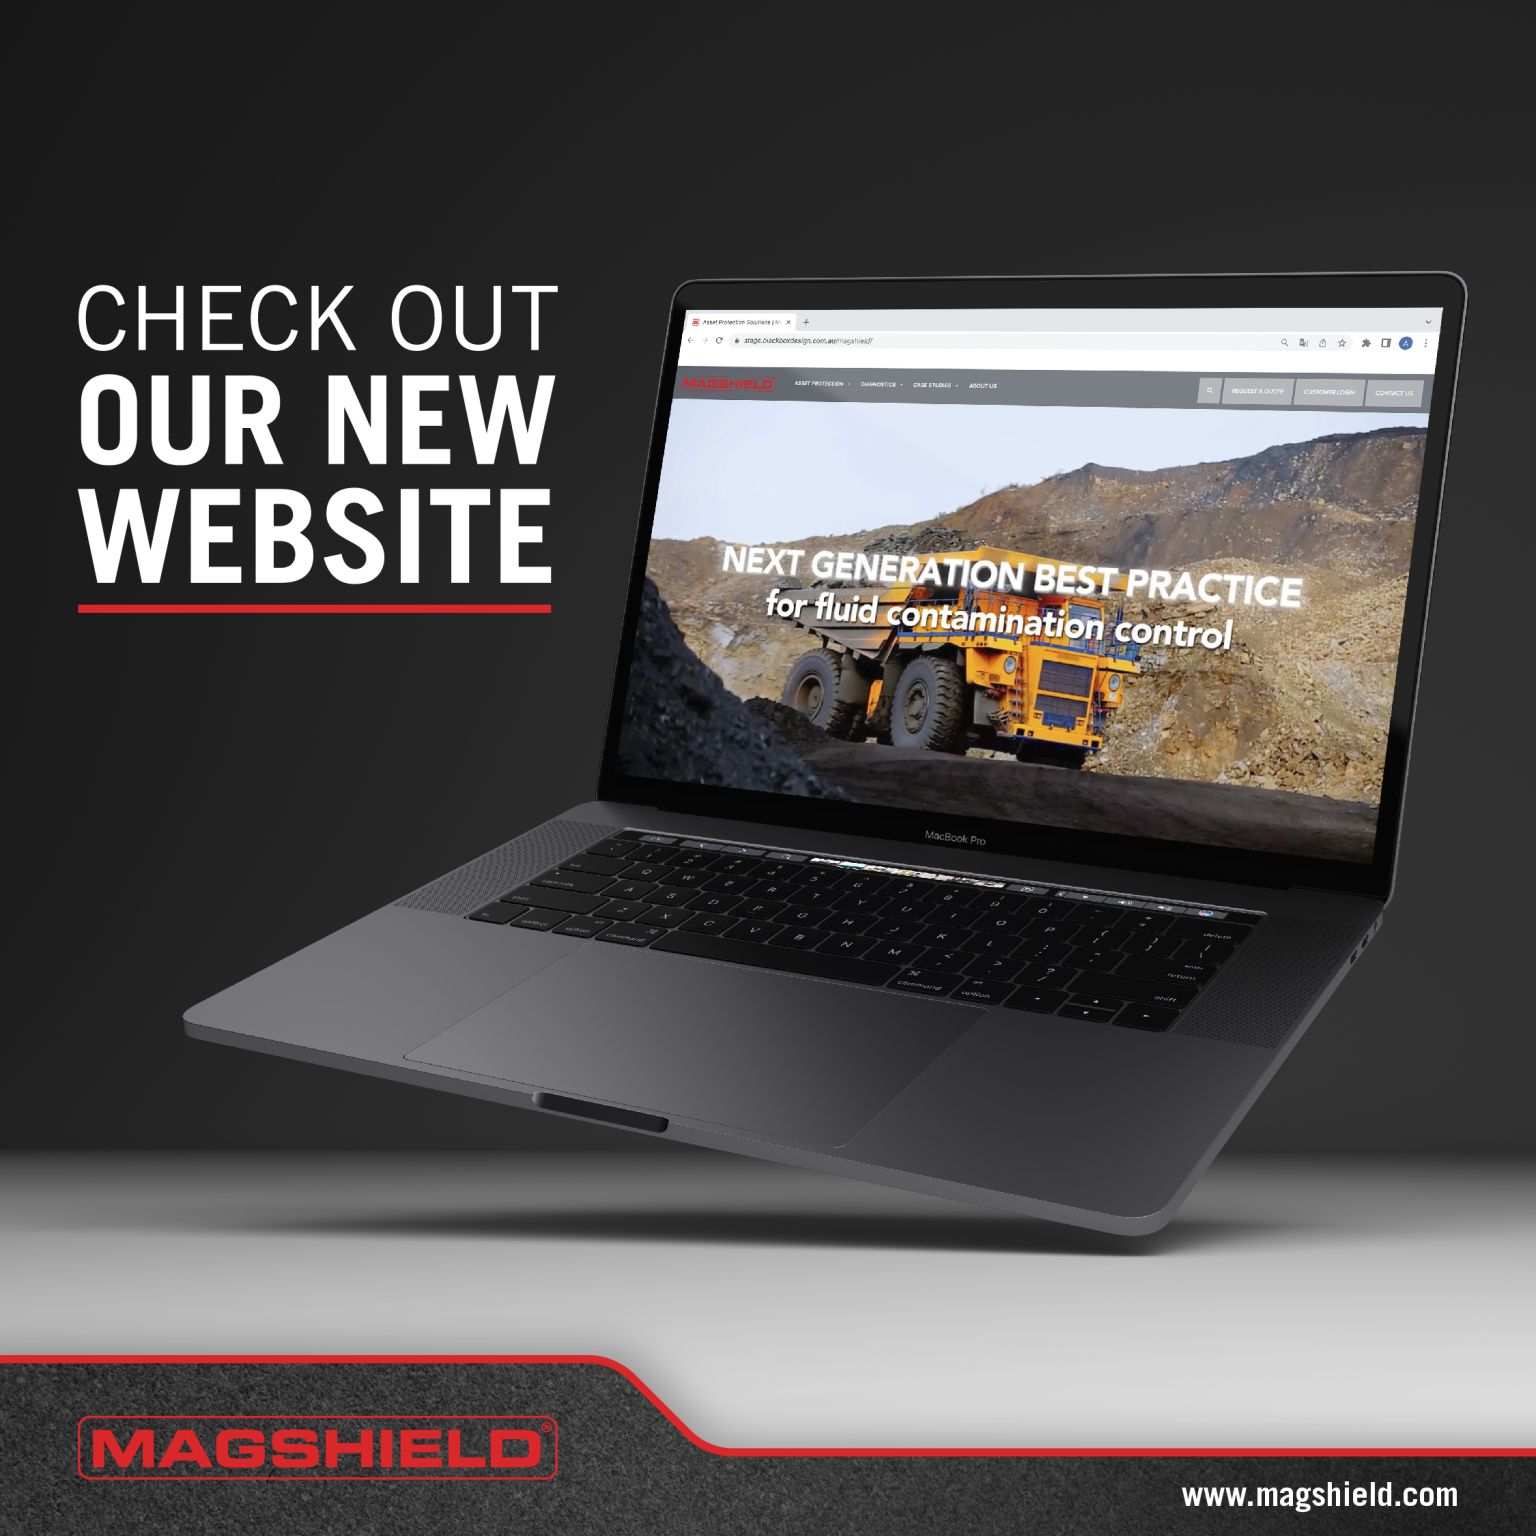 Revamped and Ready: Introducing the All-New MagShield Website